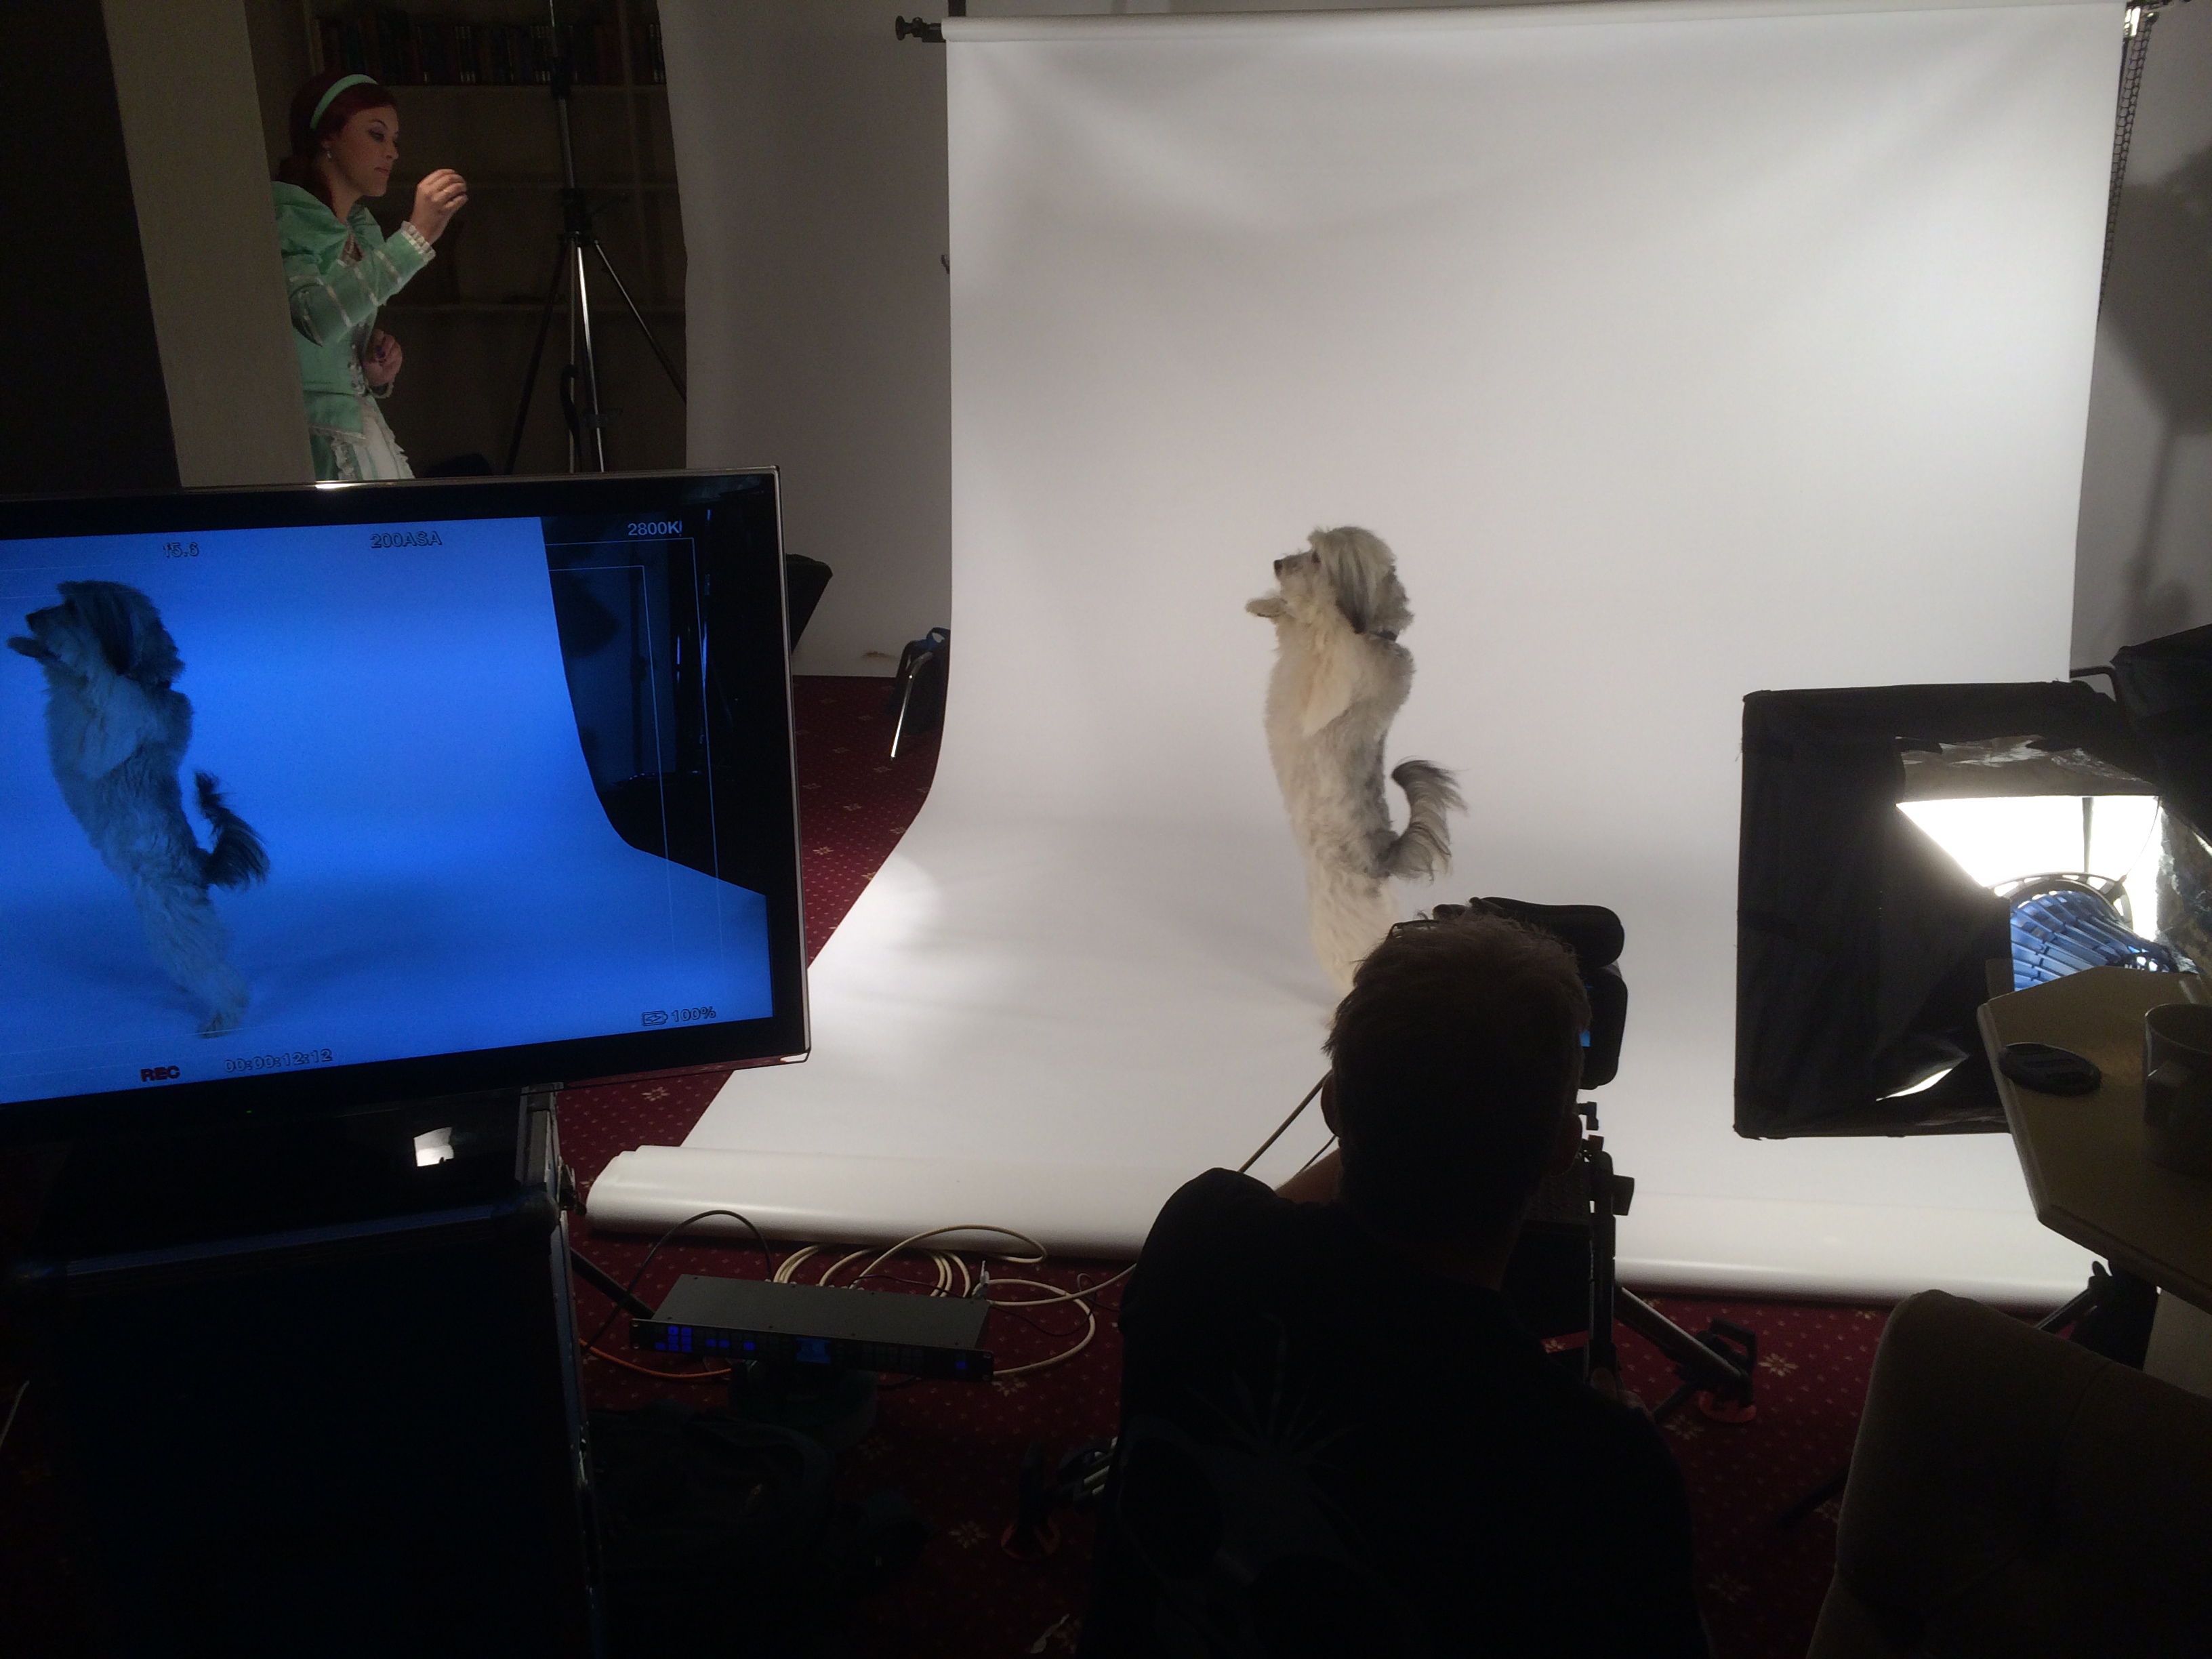 Shooting TV ad for Bristol Hippodrome panto with Ashley and Pudsey